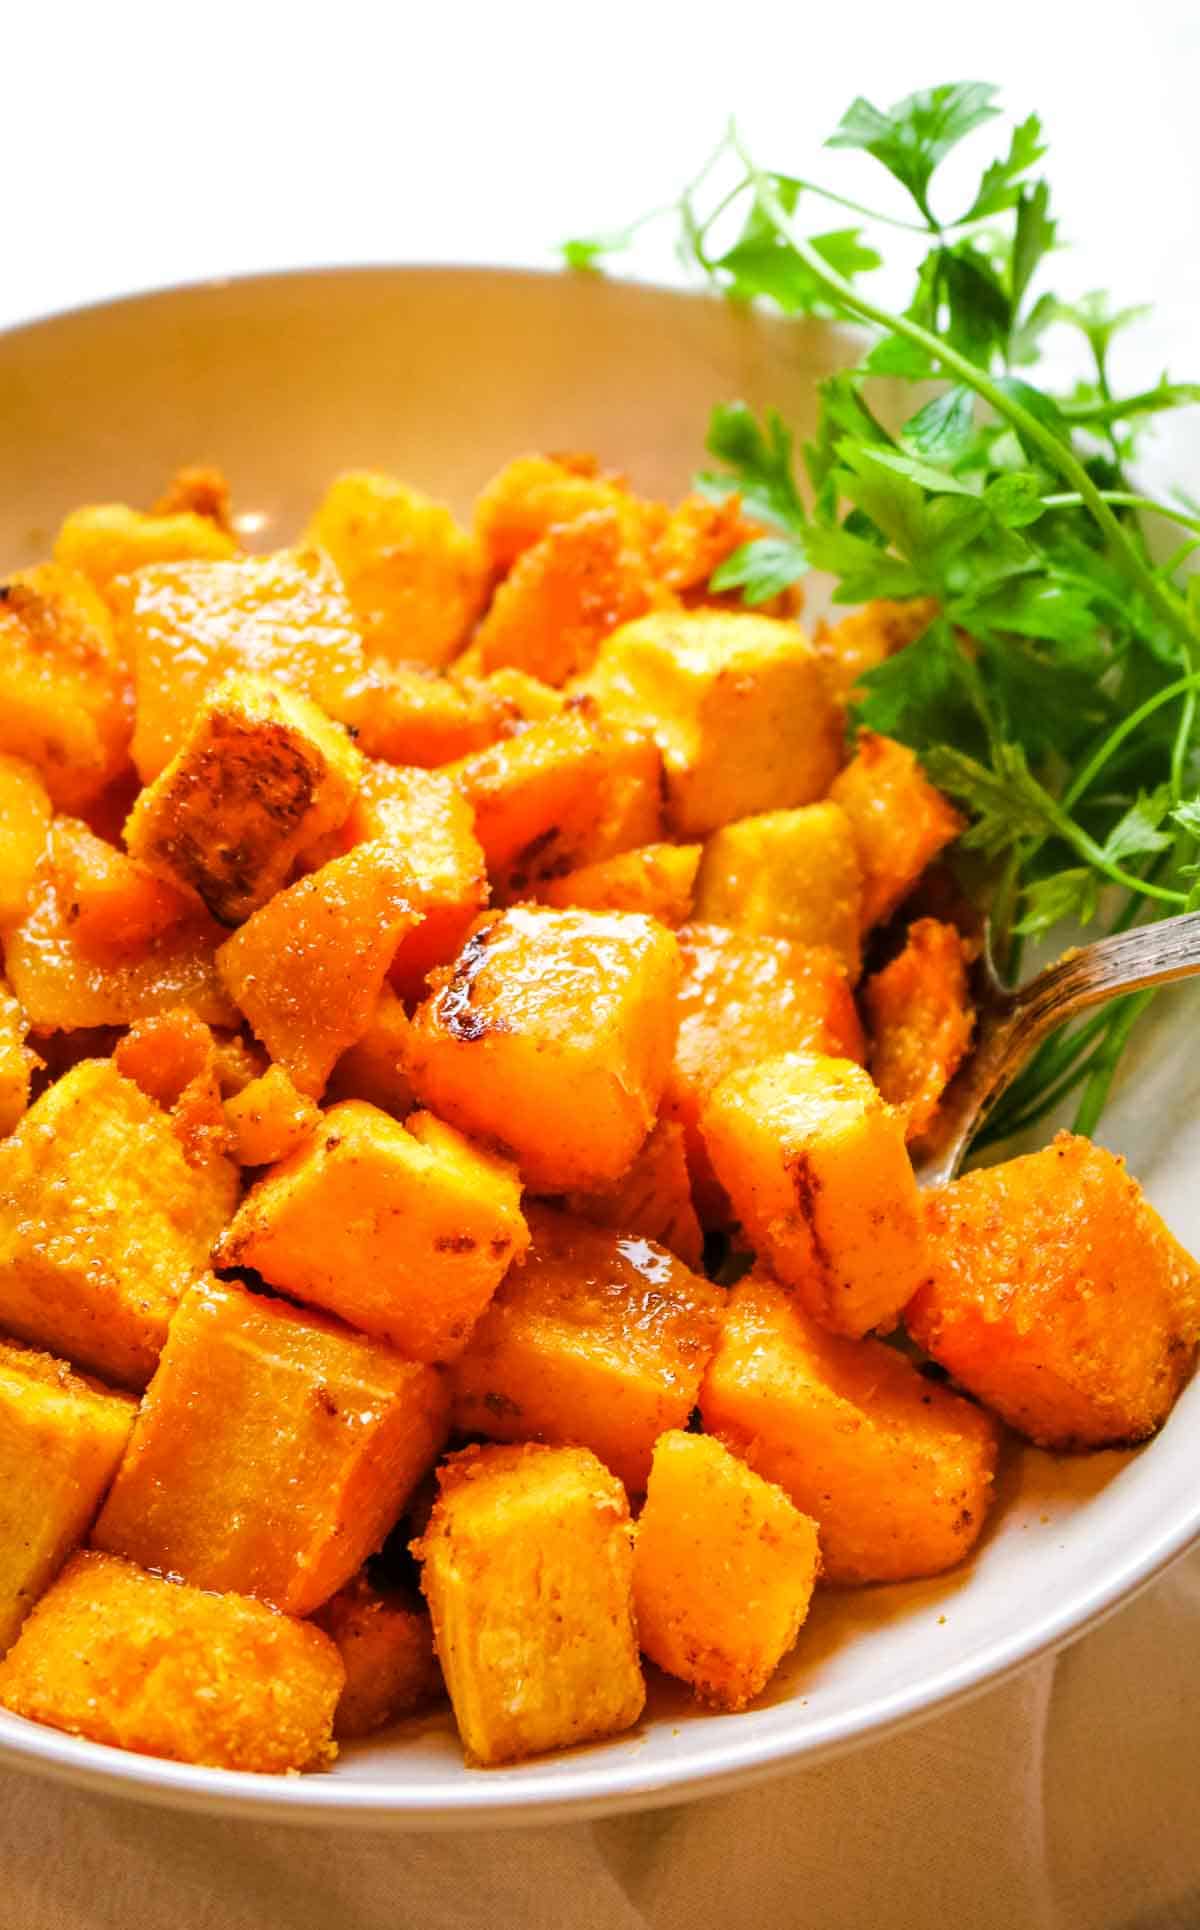 Butternut squash in white bowl with fresh parsley.